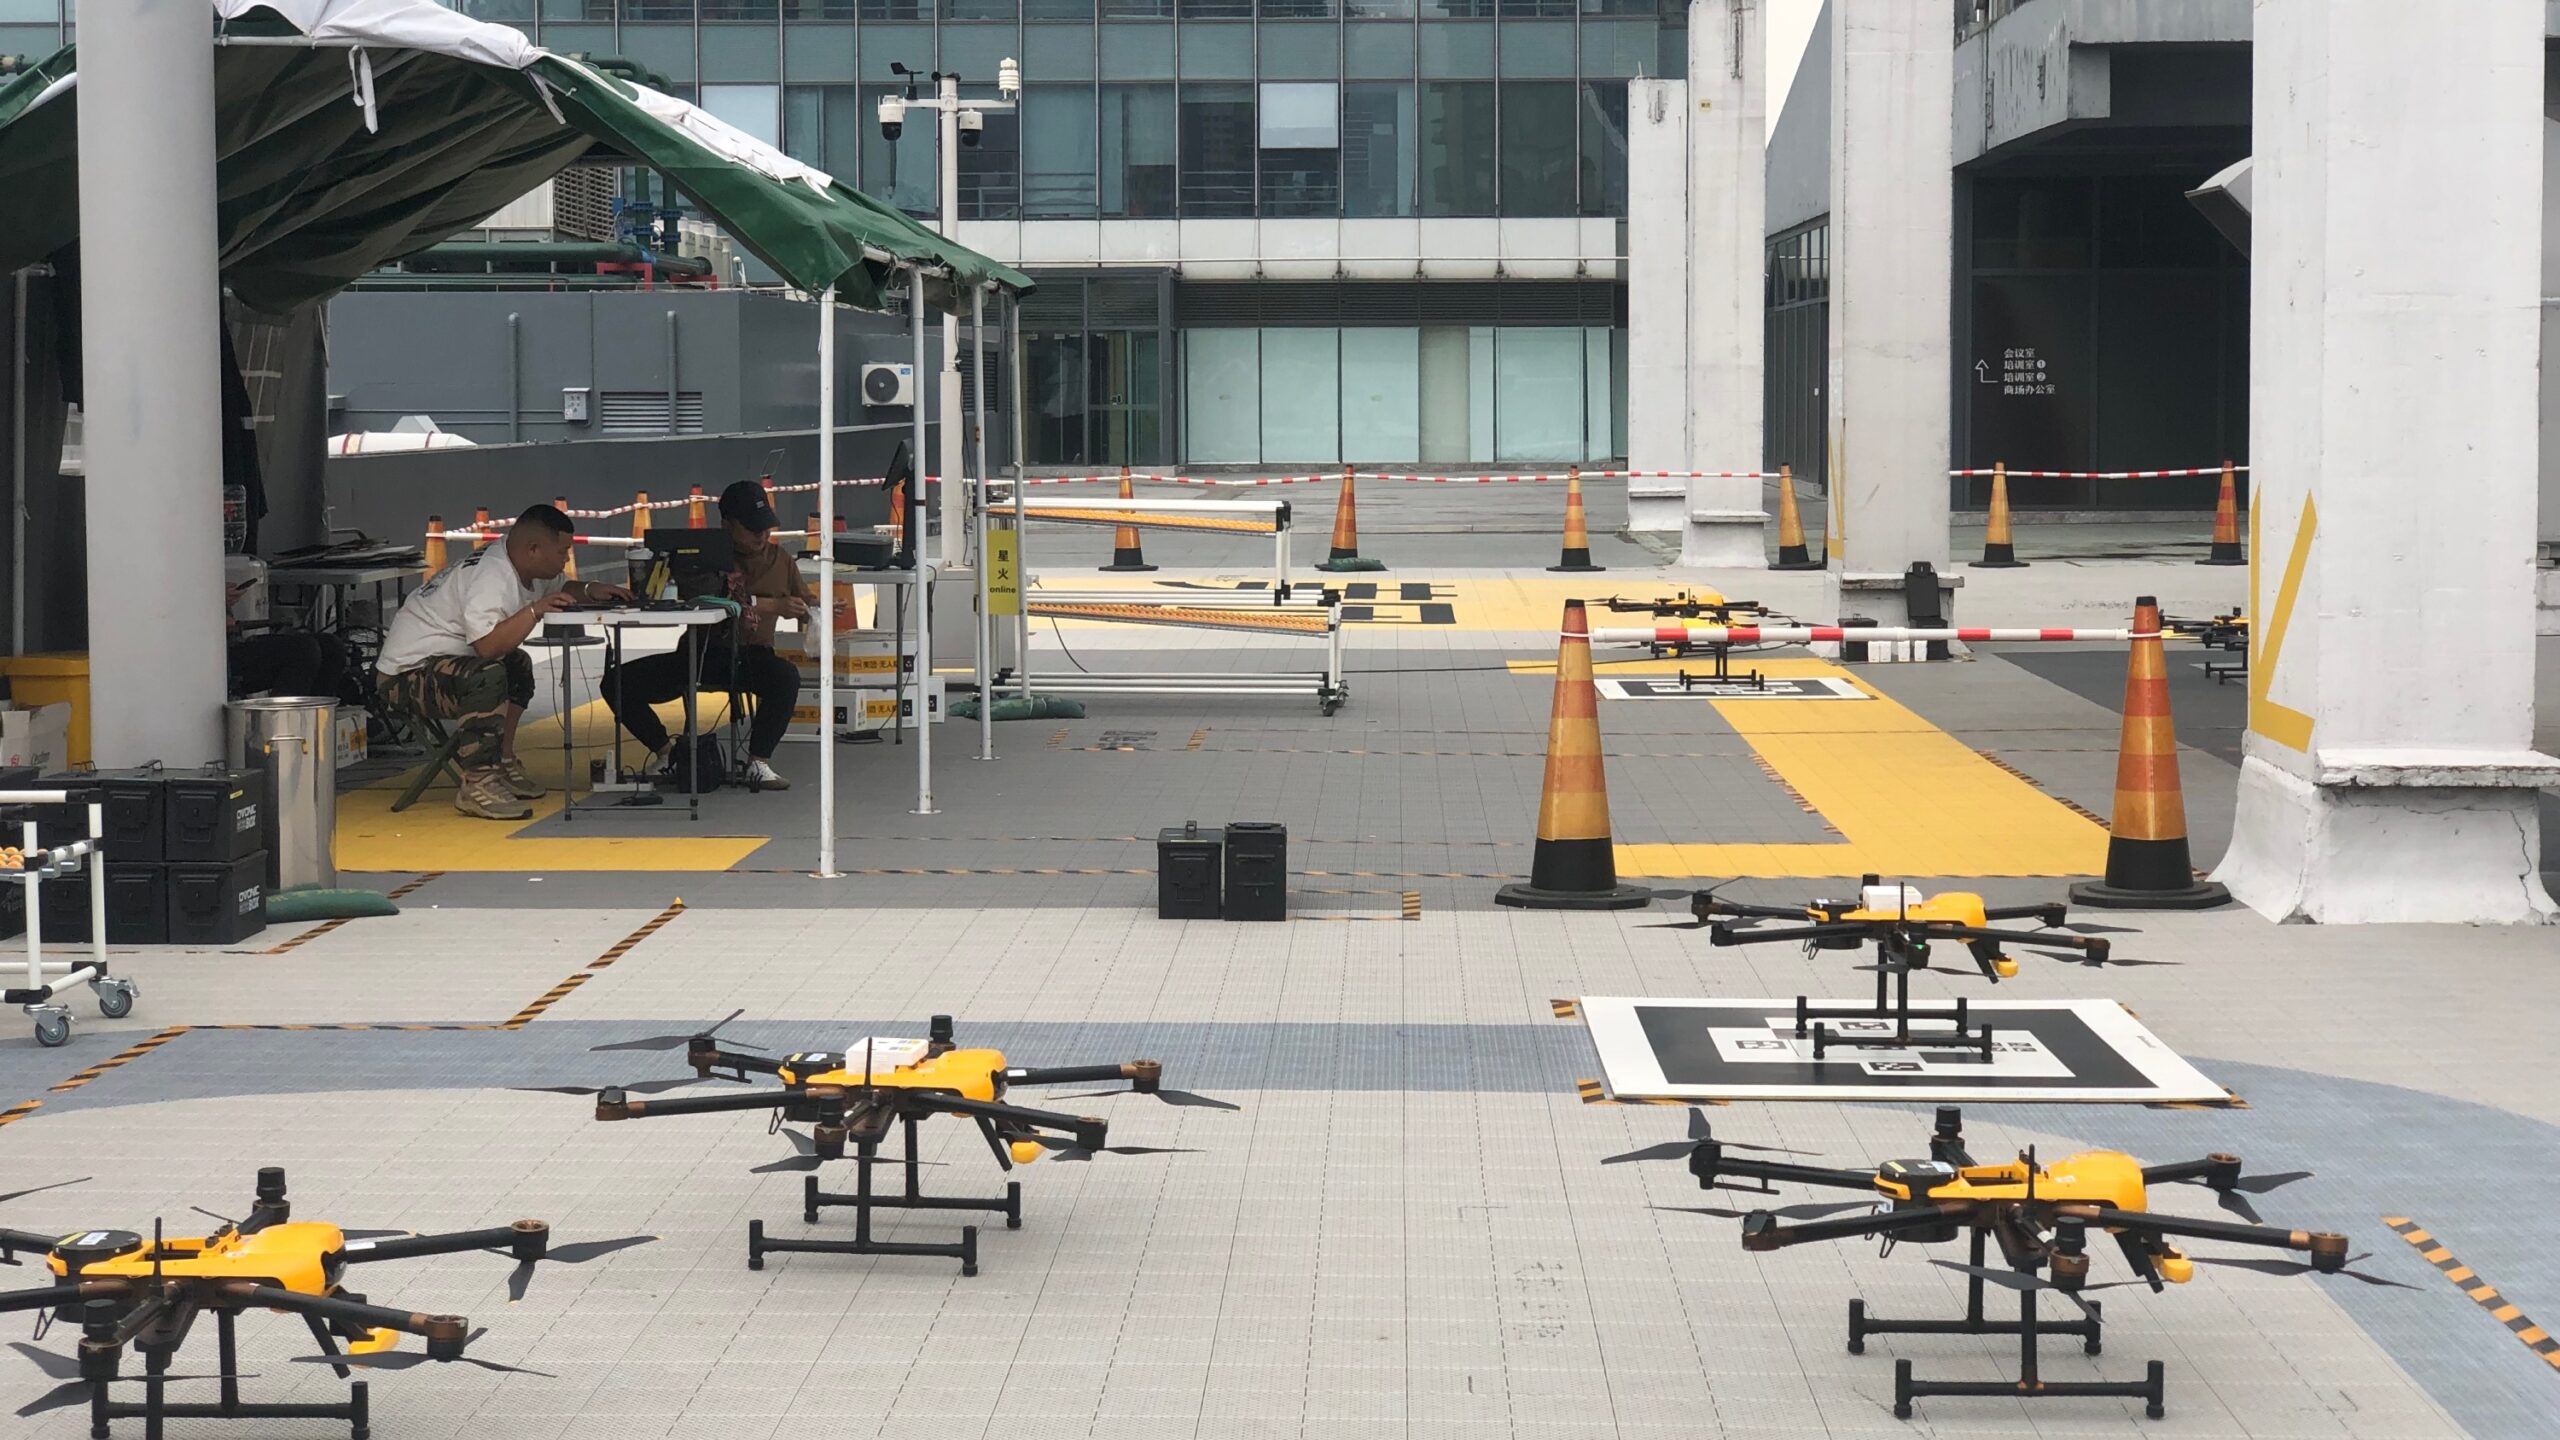 Four drones parked on the rooftop.